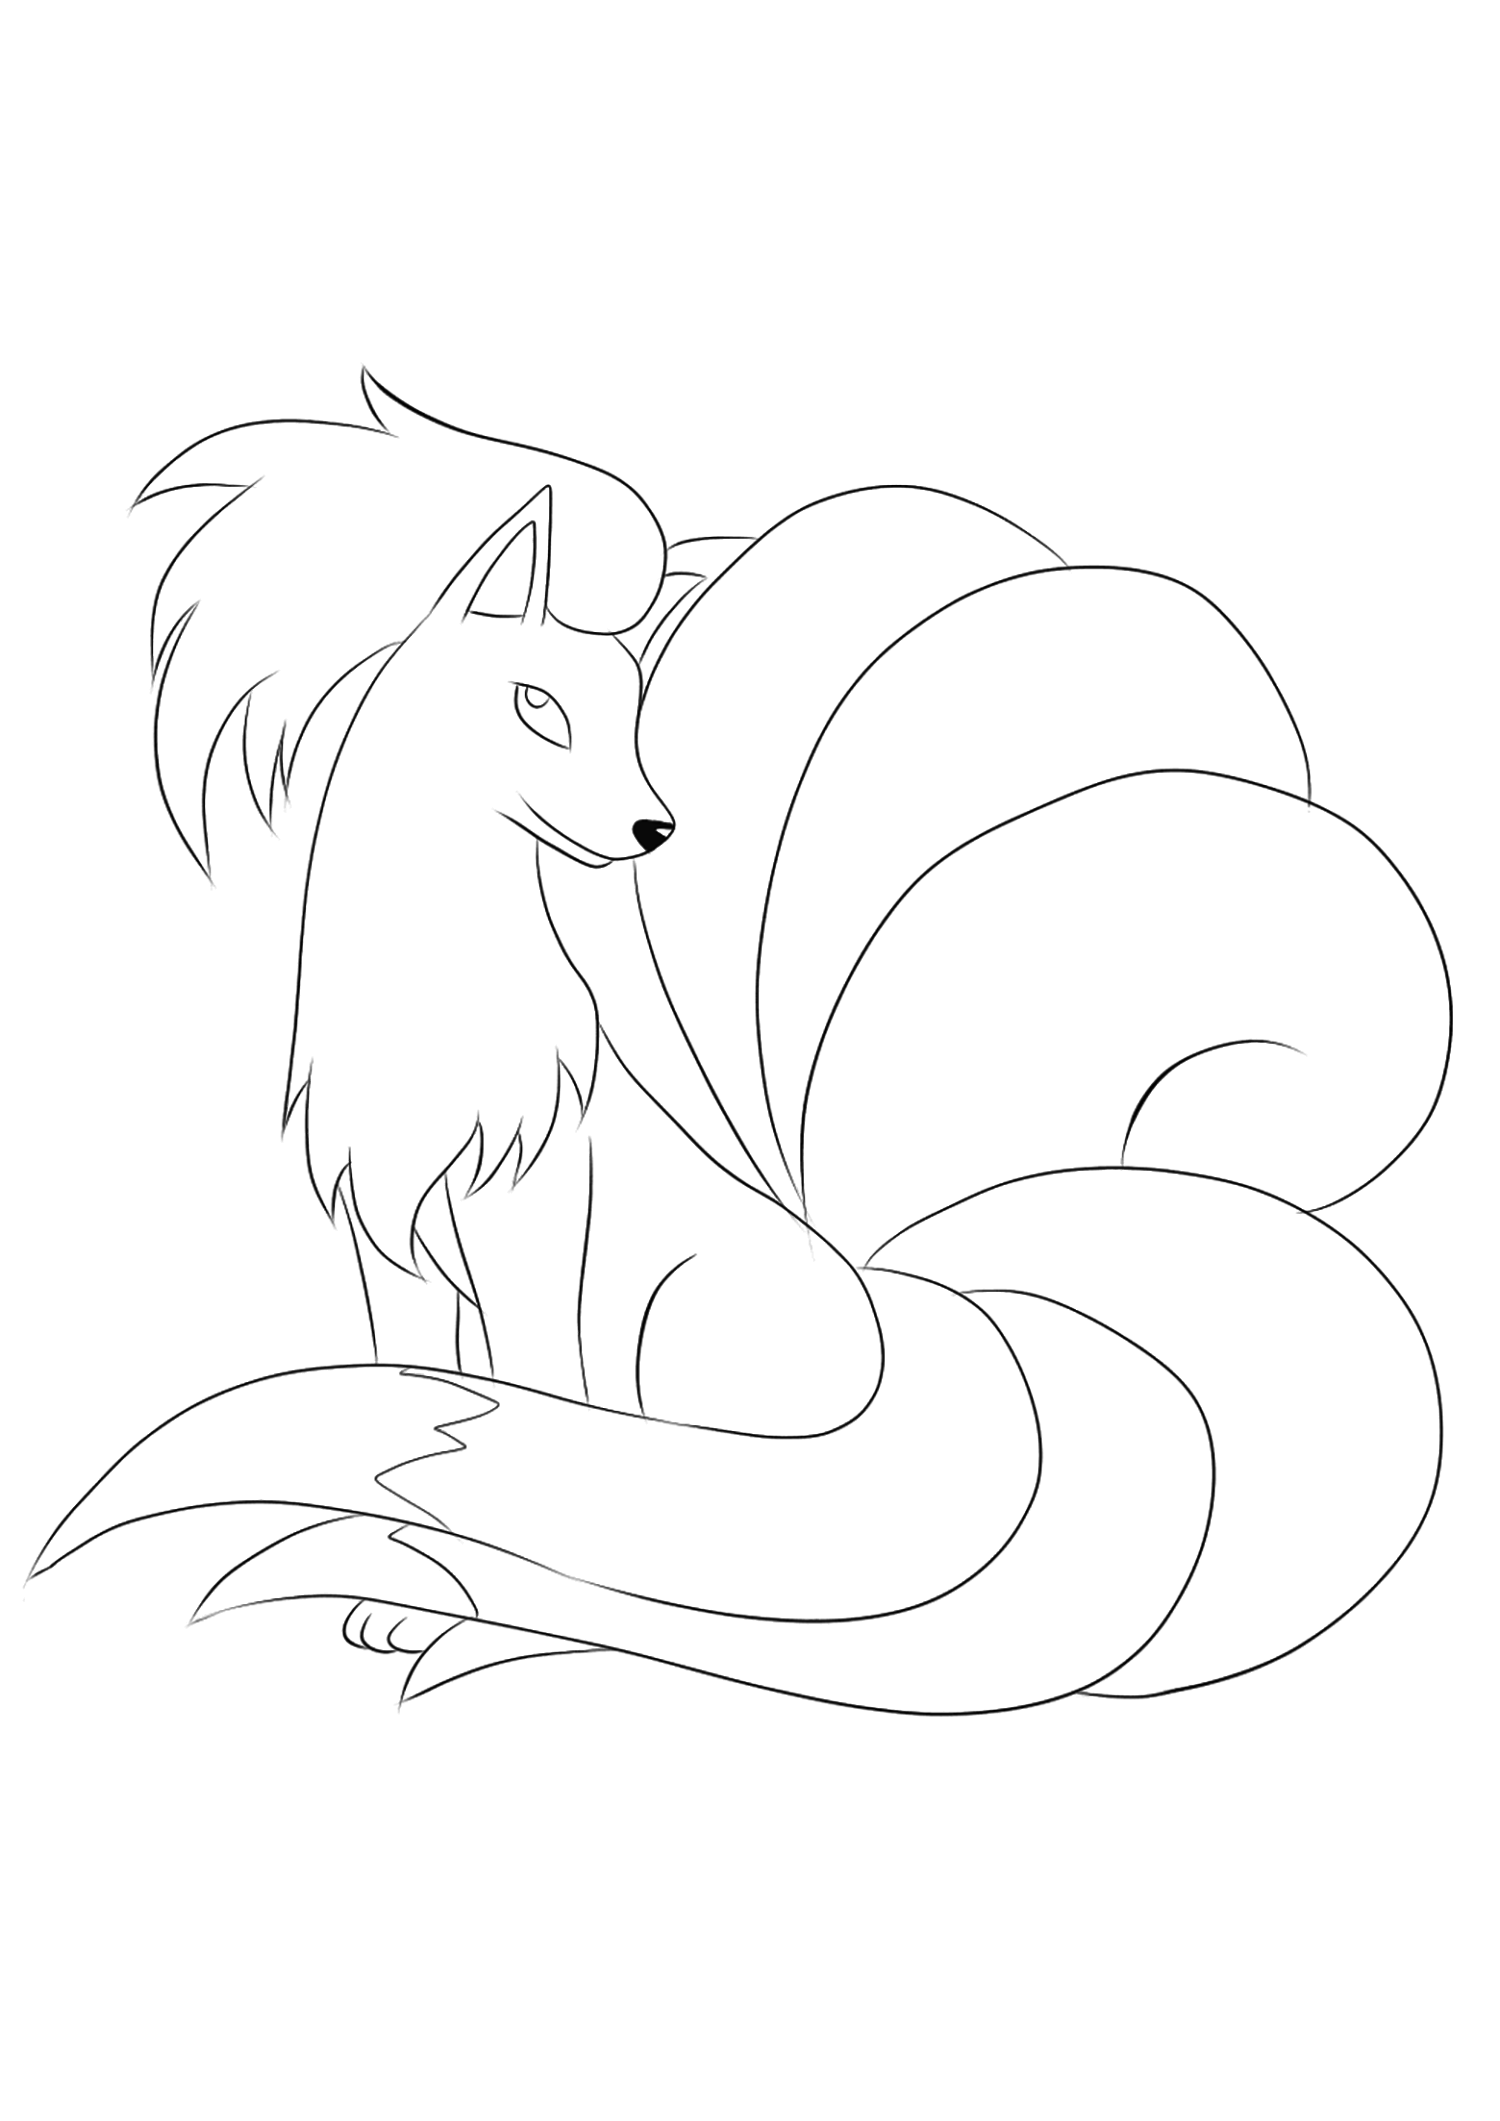 Ninetales (No.38). Ninetales Coloring page, Generation I Pokemon of type Ice and FairyOriginal image credit: Pokemon linearts by Lilly Gerbil'font-size:smaller;color:gray'>Permission: All rights reserved © Pokemon company and Ken Sugimori.